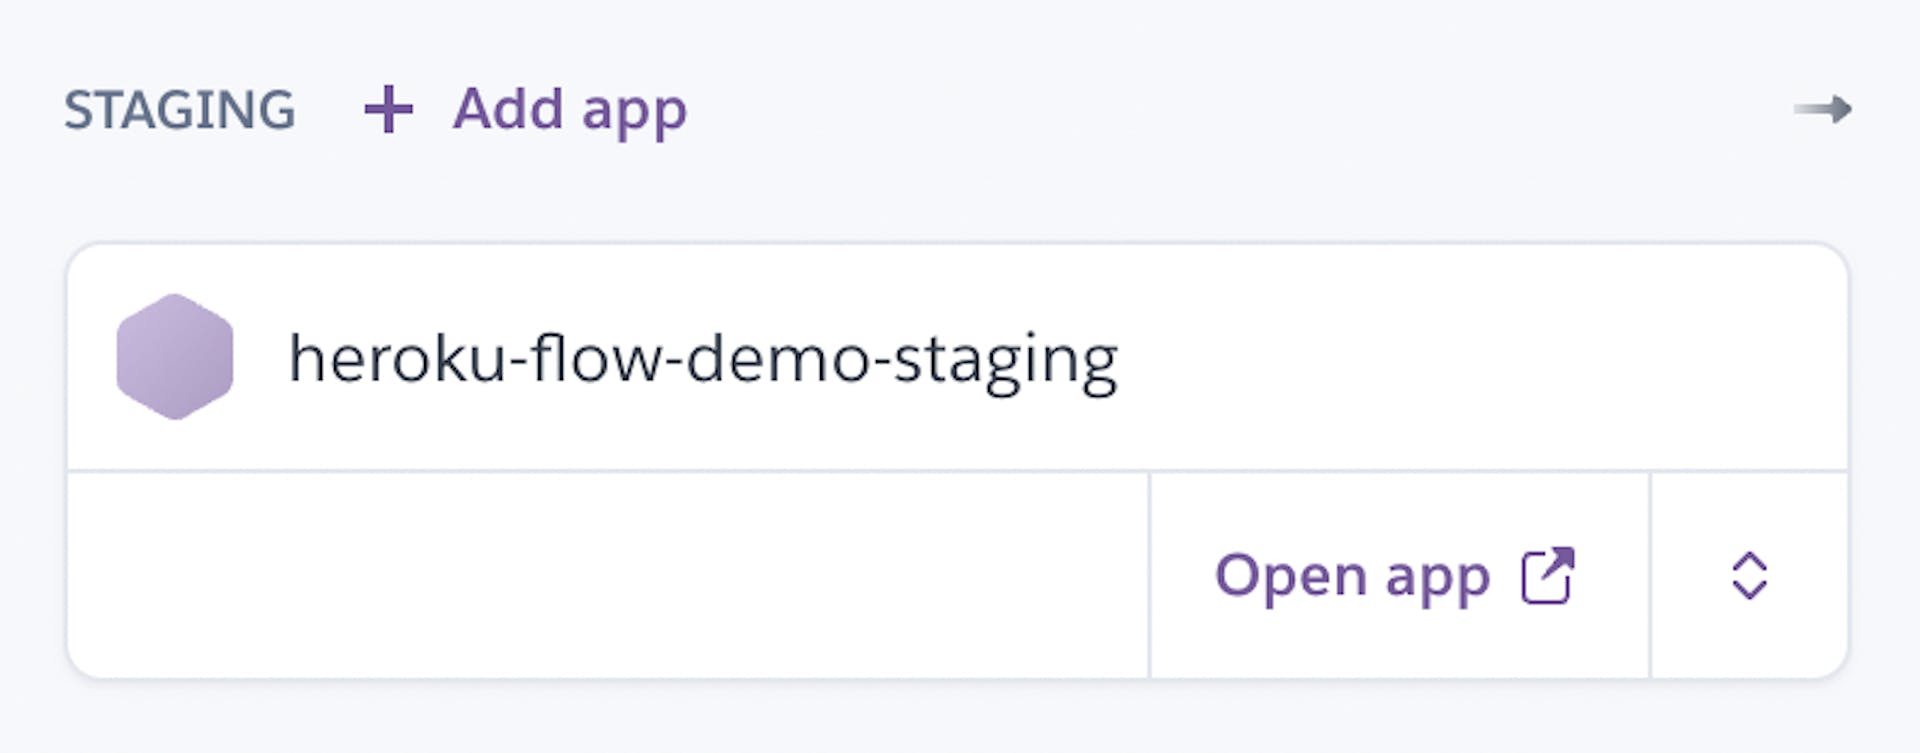 Newly created staging app